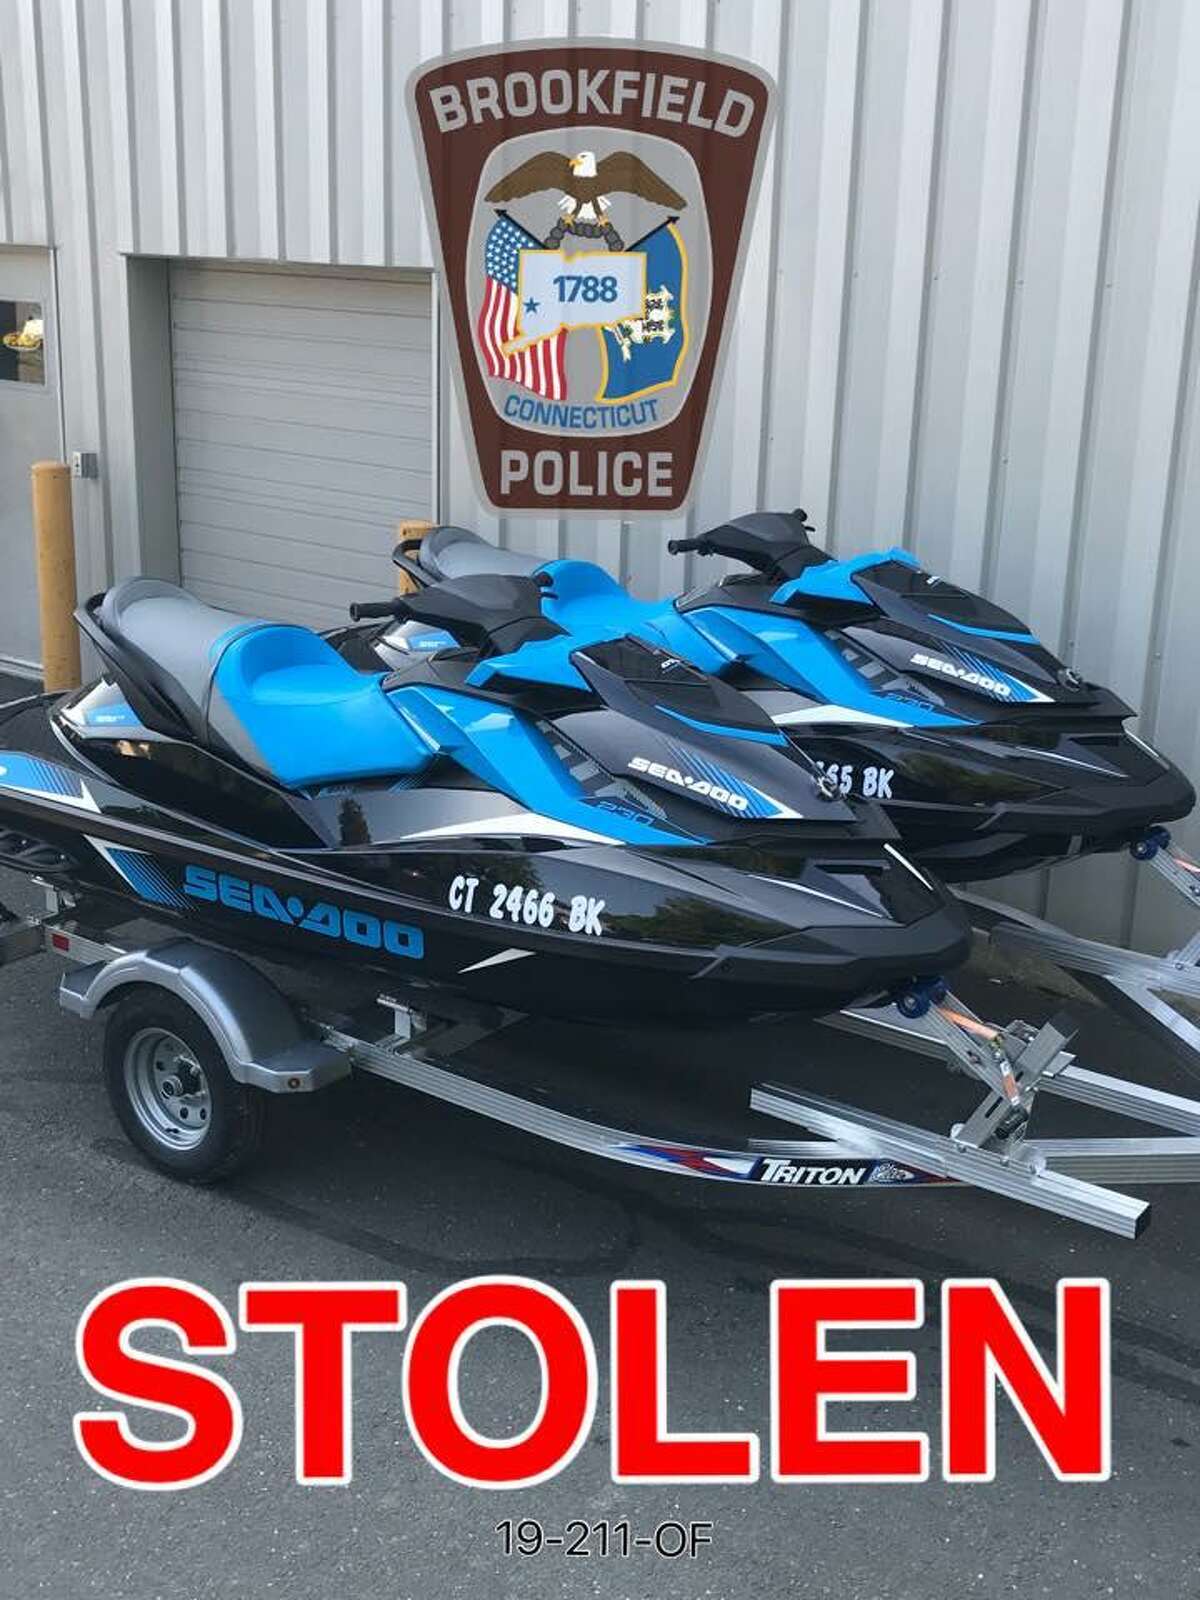 These jet skis and a trailer were stolen in Brookfield, police said.